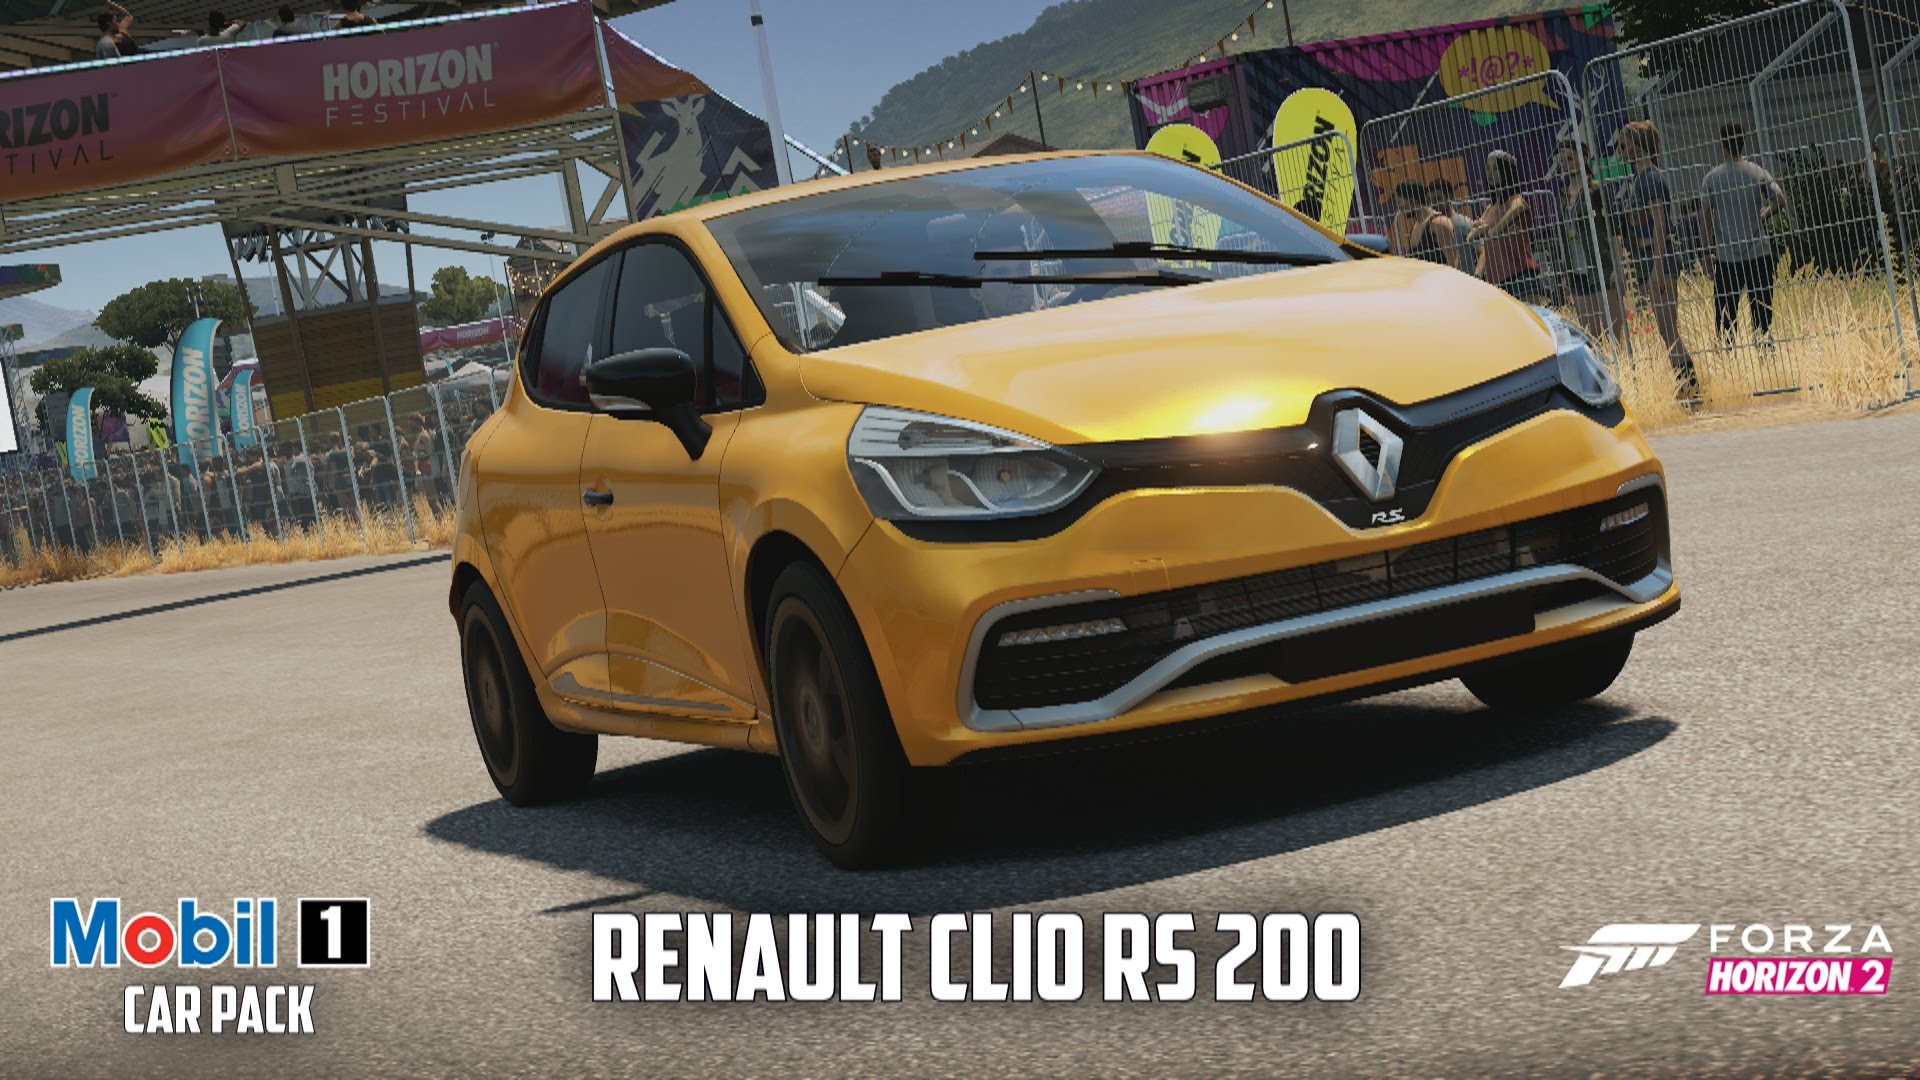 Forza Horizon 2 - Renault Clio RS 200 Gameplay - Mobil 1 Car Pack ...